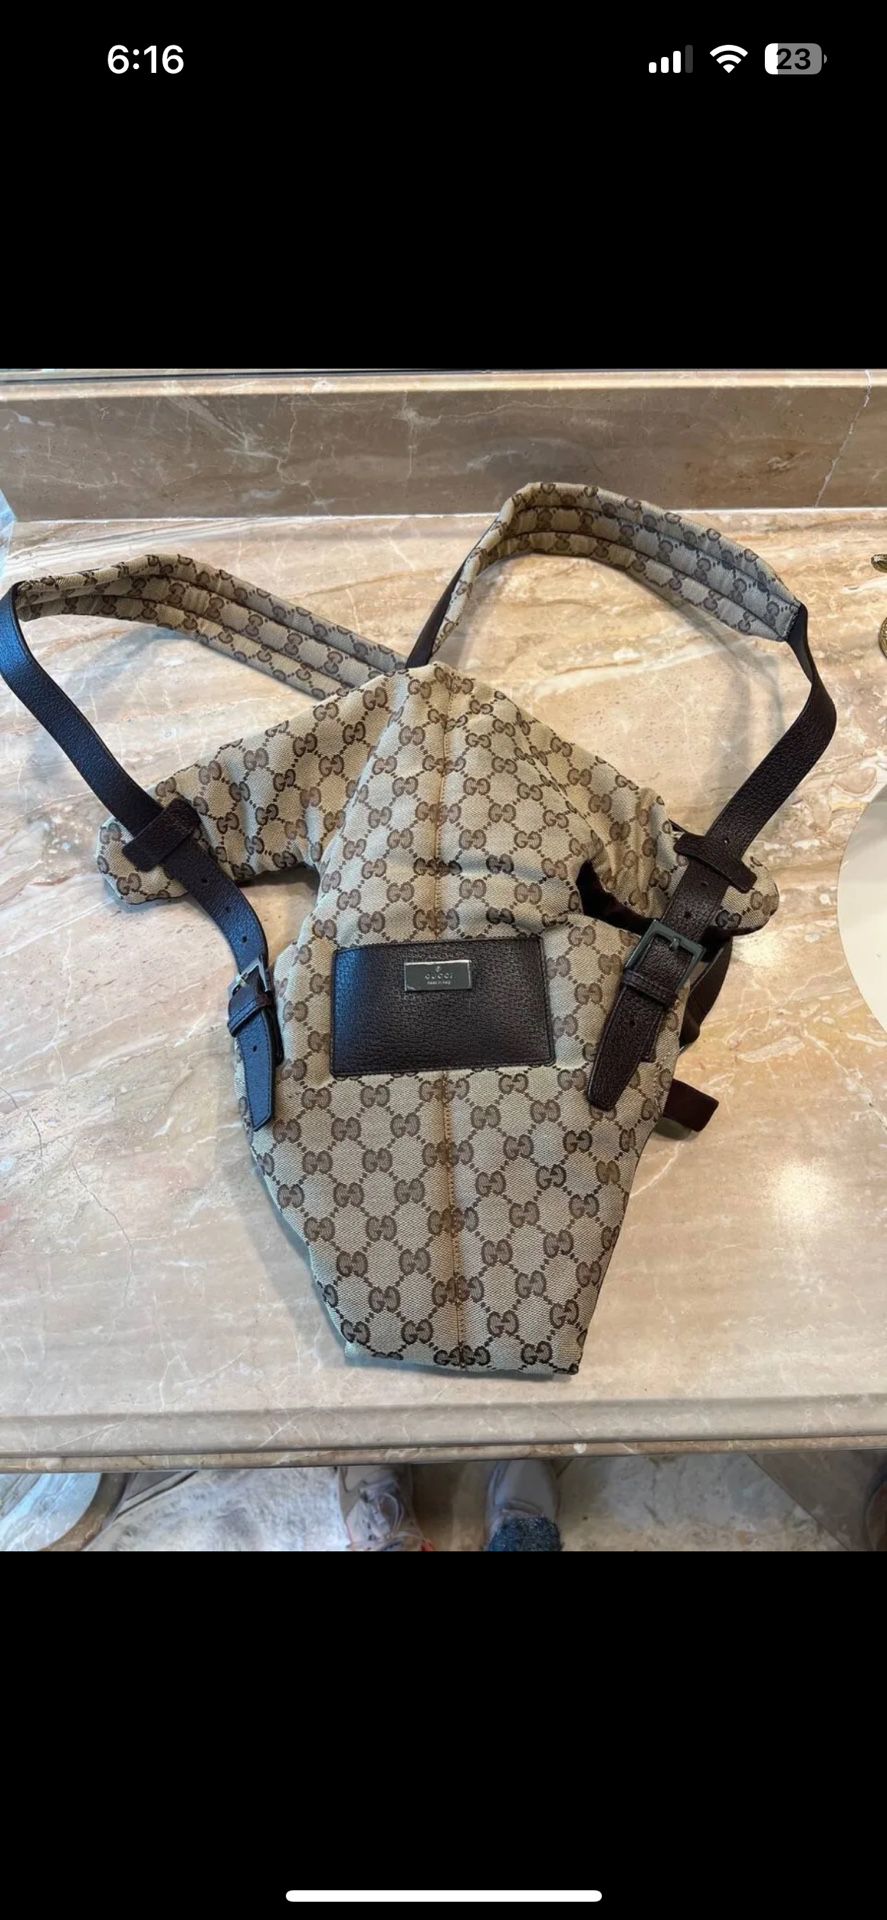 Authentic Gucci Monogram Baby Carrier 